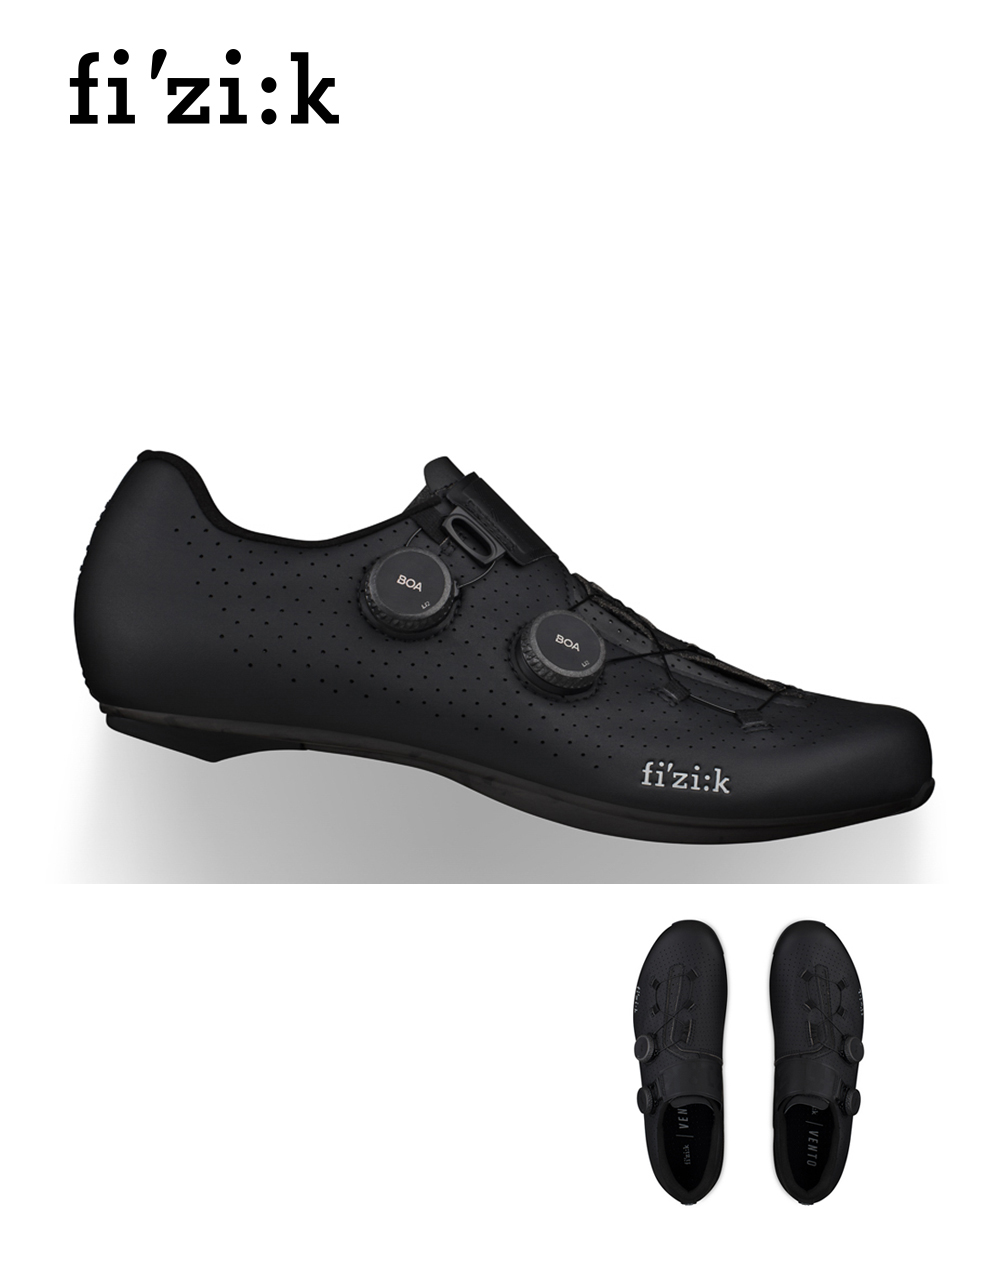 Bicycle Cycling Shoes Buy Online Cycling Shoes Branded Bike Spares and Accessories Store in India.